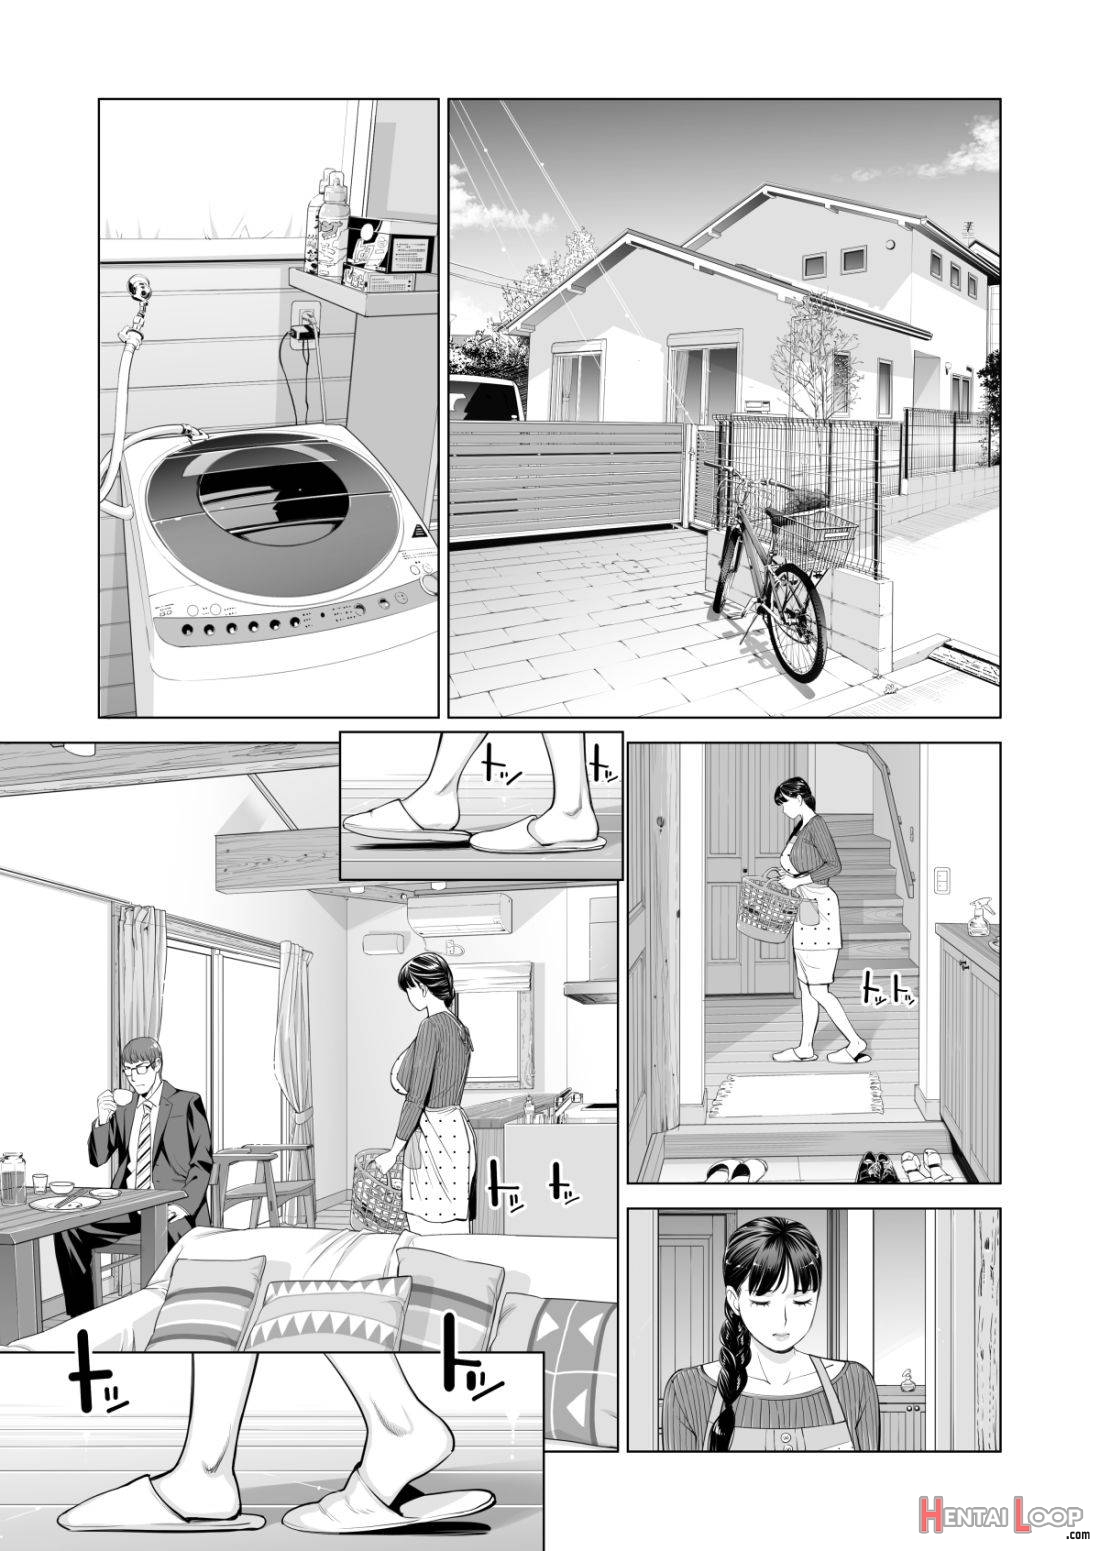 Tsukiyo no Midare Zake (Kouhen) Moonlit Intoxication ~ A Housewife Stolen by a Coworker Besides her Blackout Drunk Husband ~ Chapter 2 page 3